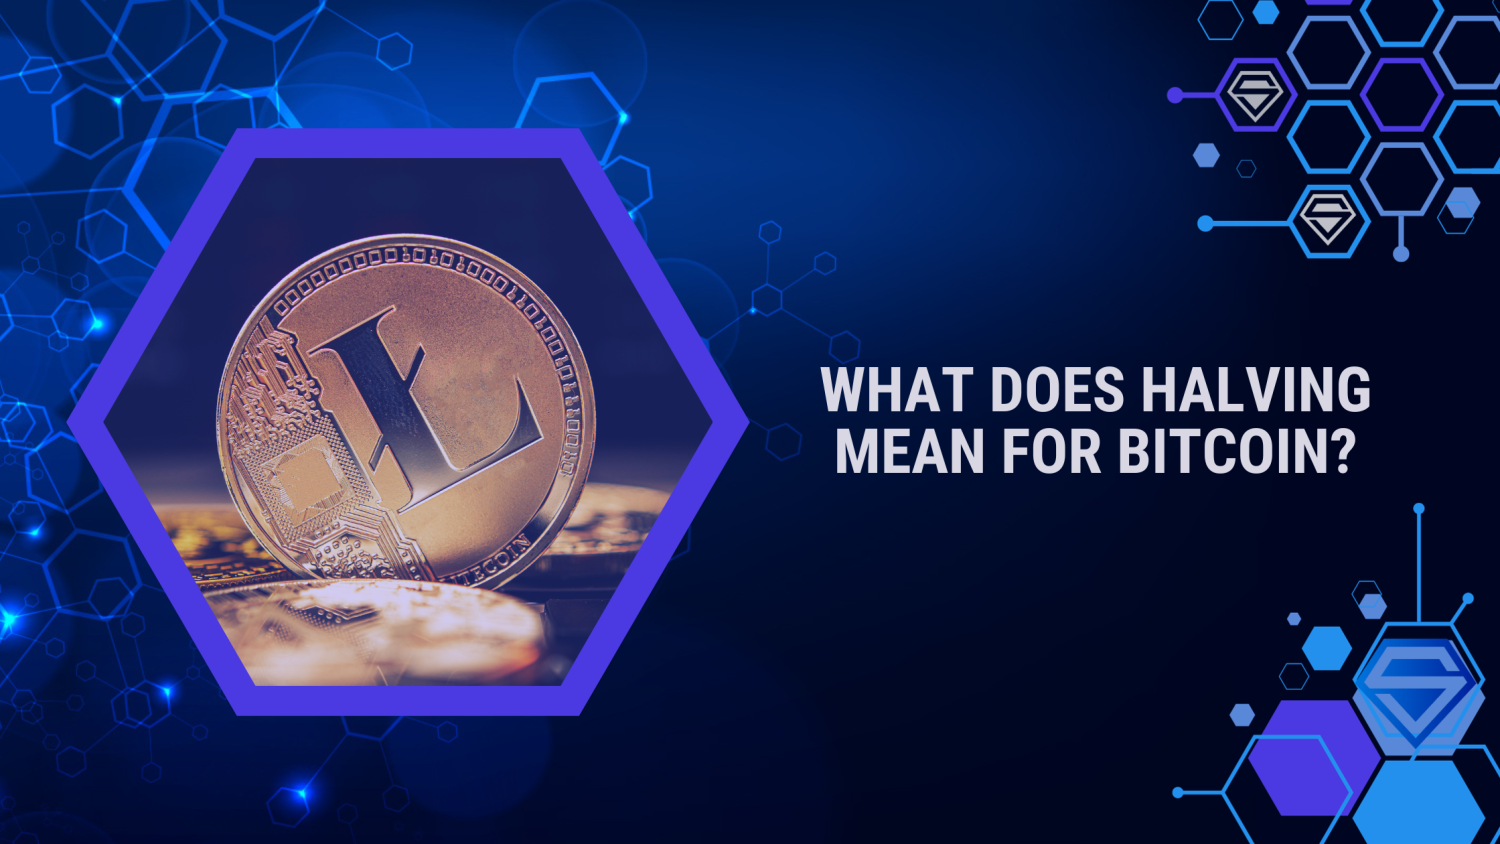 What does Halving Mean for Bitcoin?